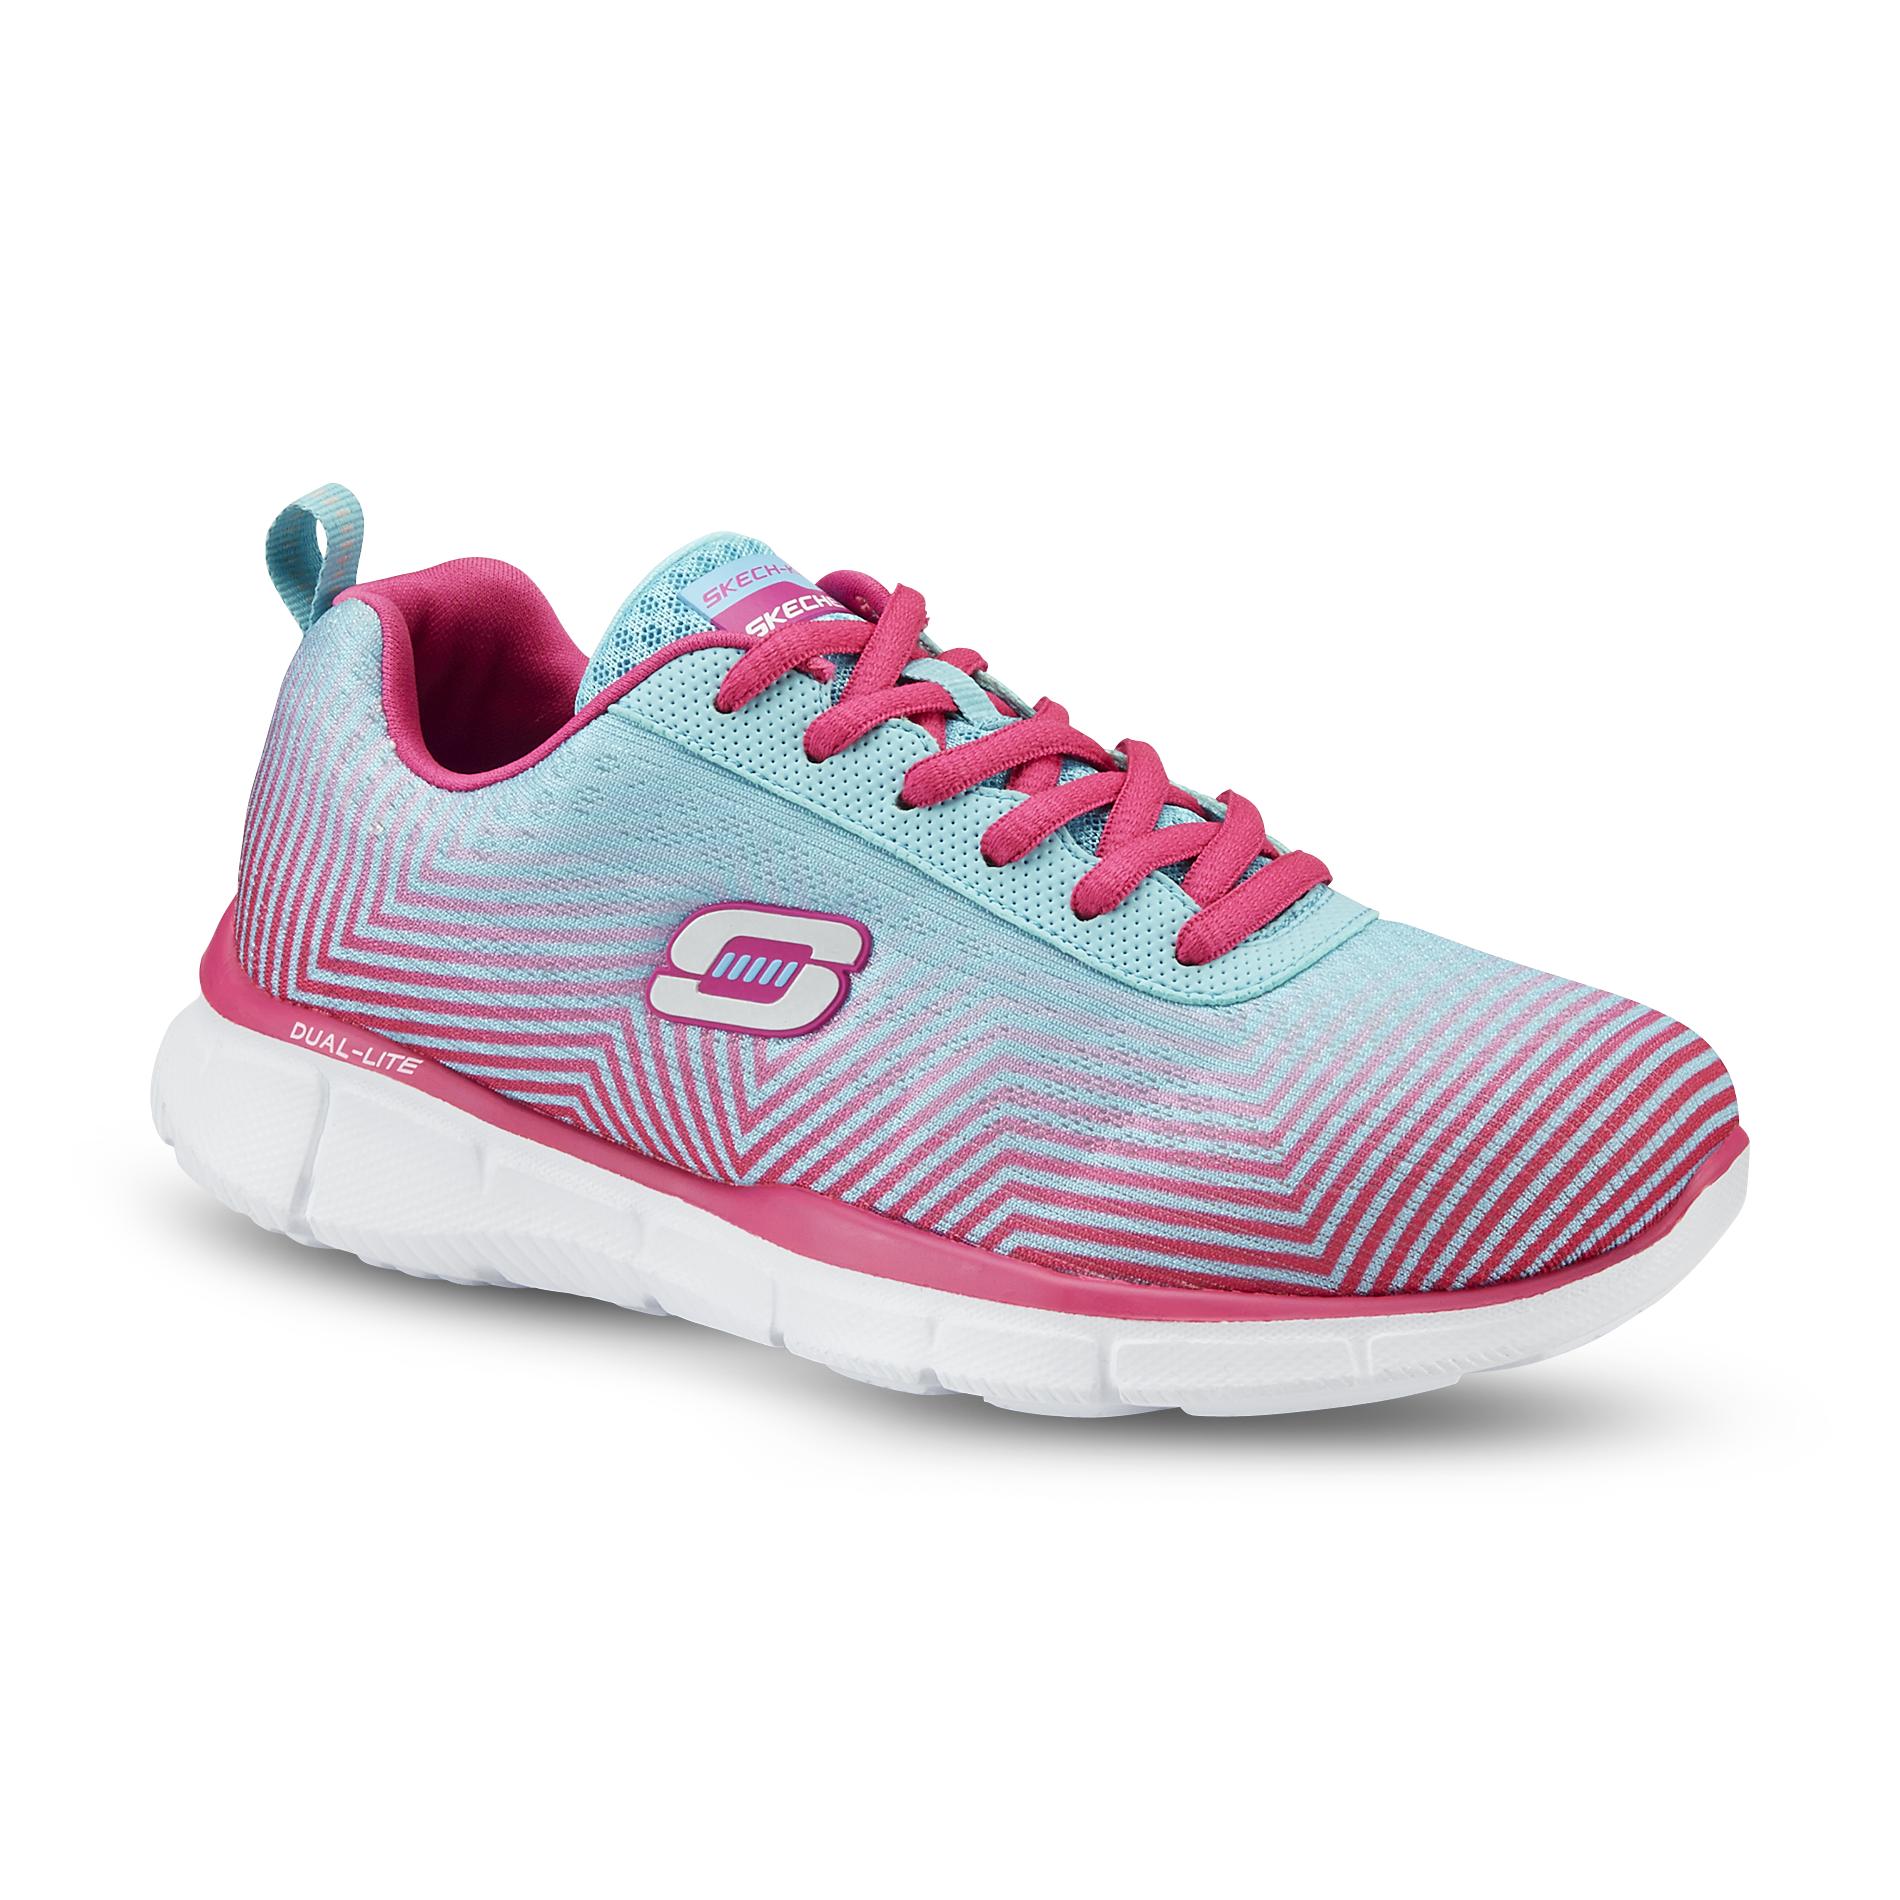 Skechers Women's Expect Miracles Pink/Blue Chevron Striped Athletic Shoe